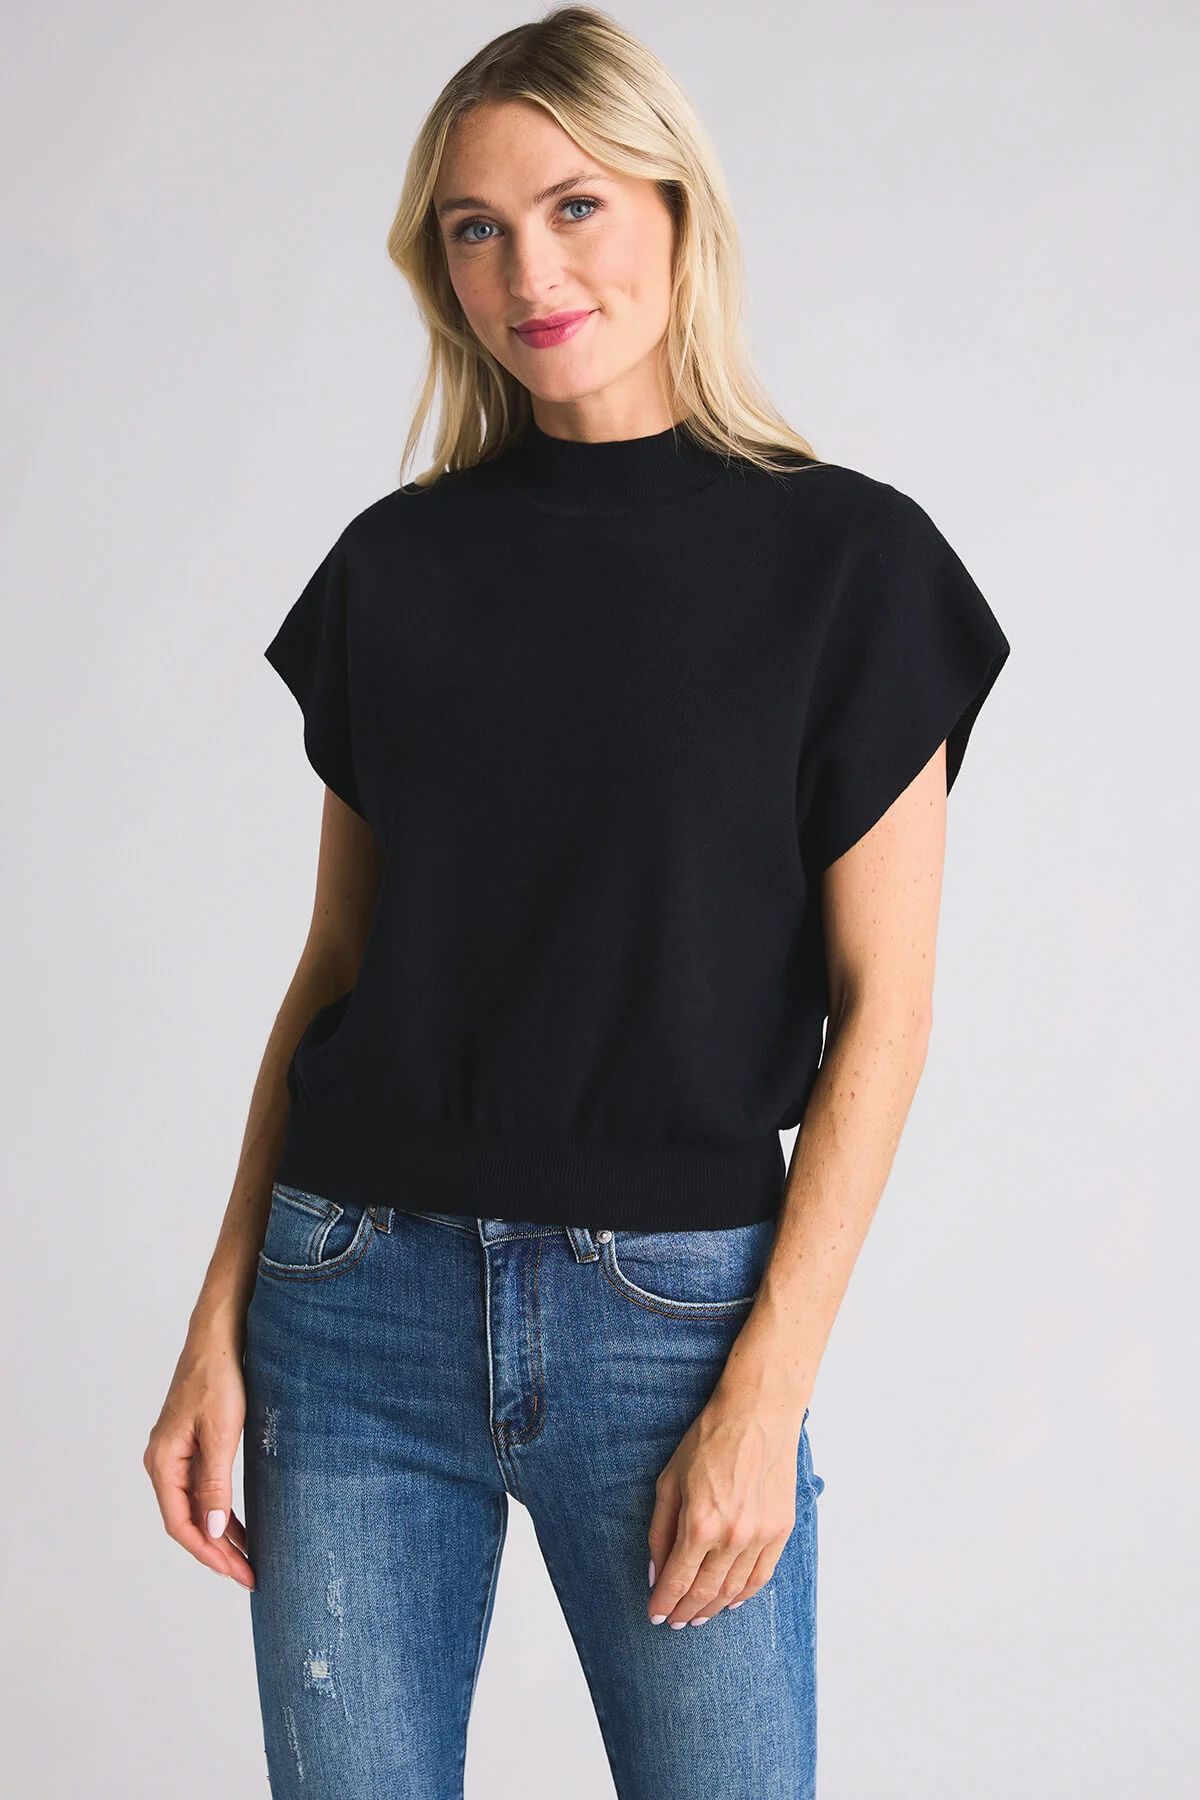 Eesome Mockneck Sleeveless Knit Sweater | Social Threads